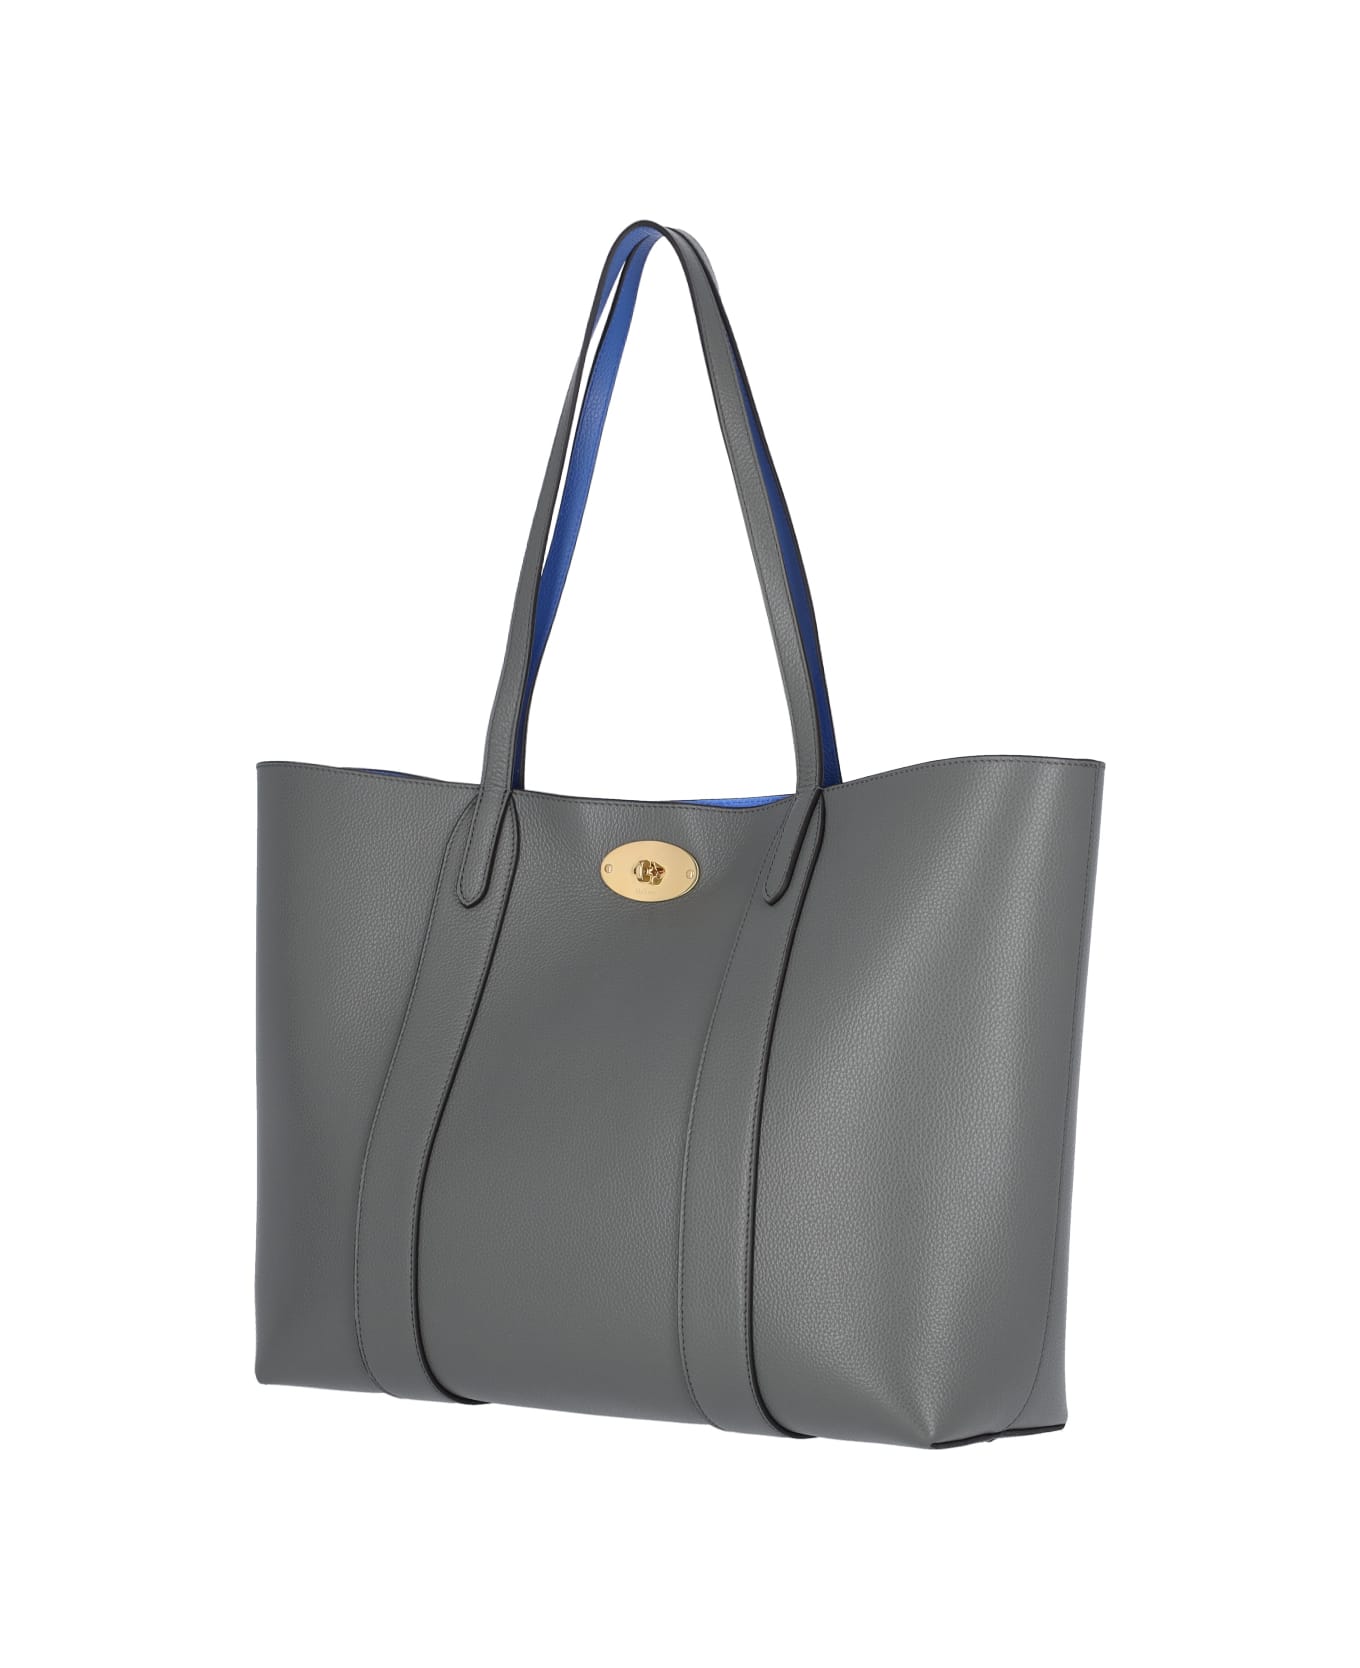 Mulberry "bayswater" Tote Bag - Gray トートバッグ